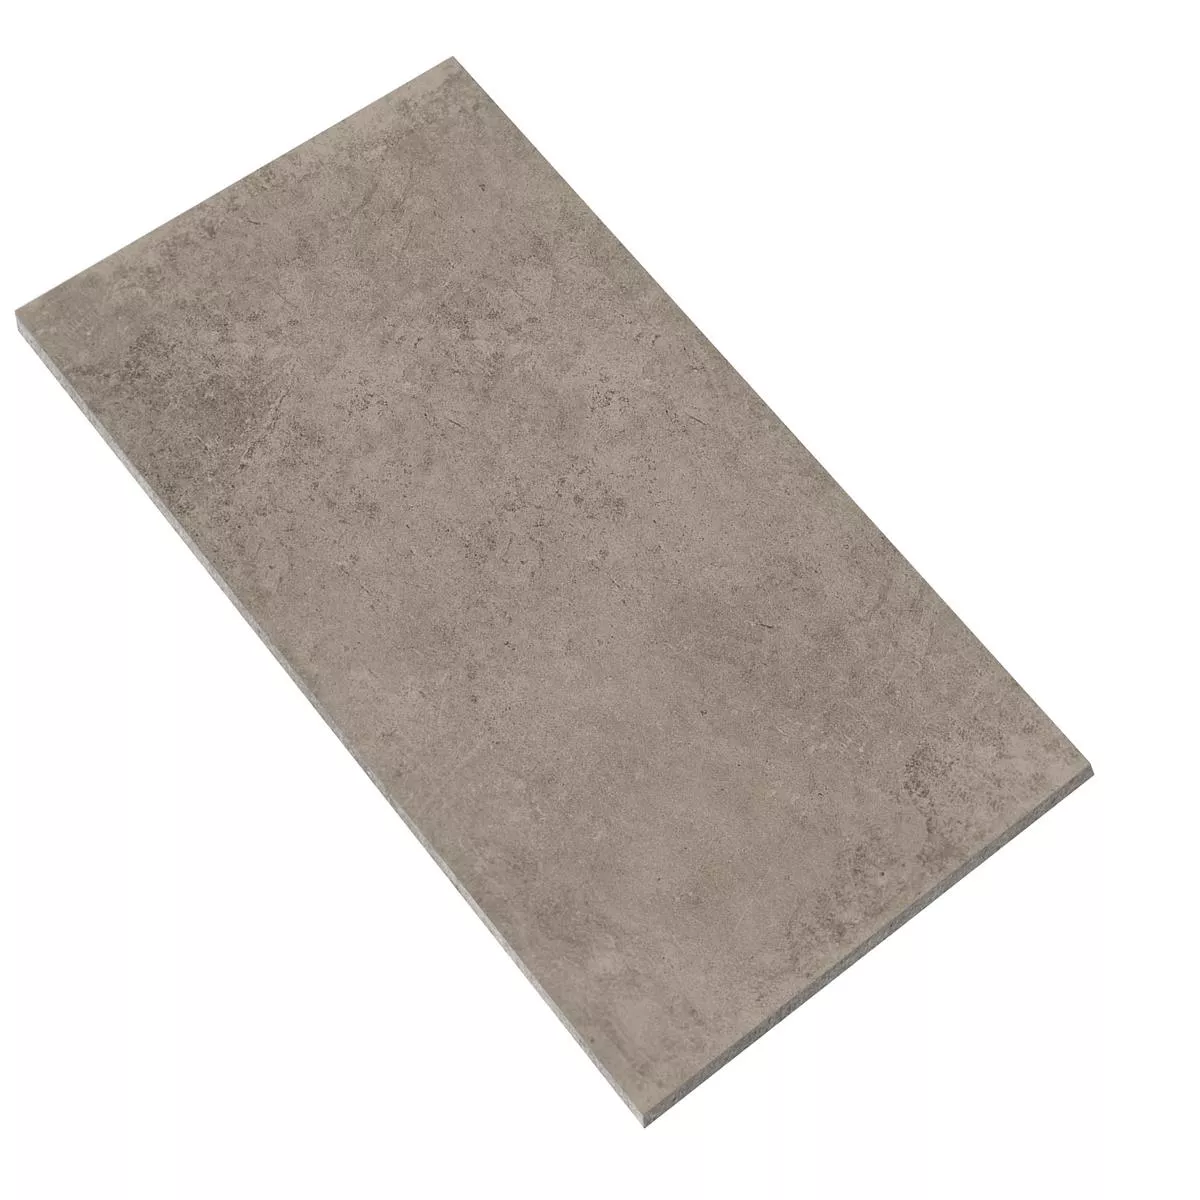 Floor Tiles Colossus Taupe 30x60cm